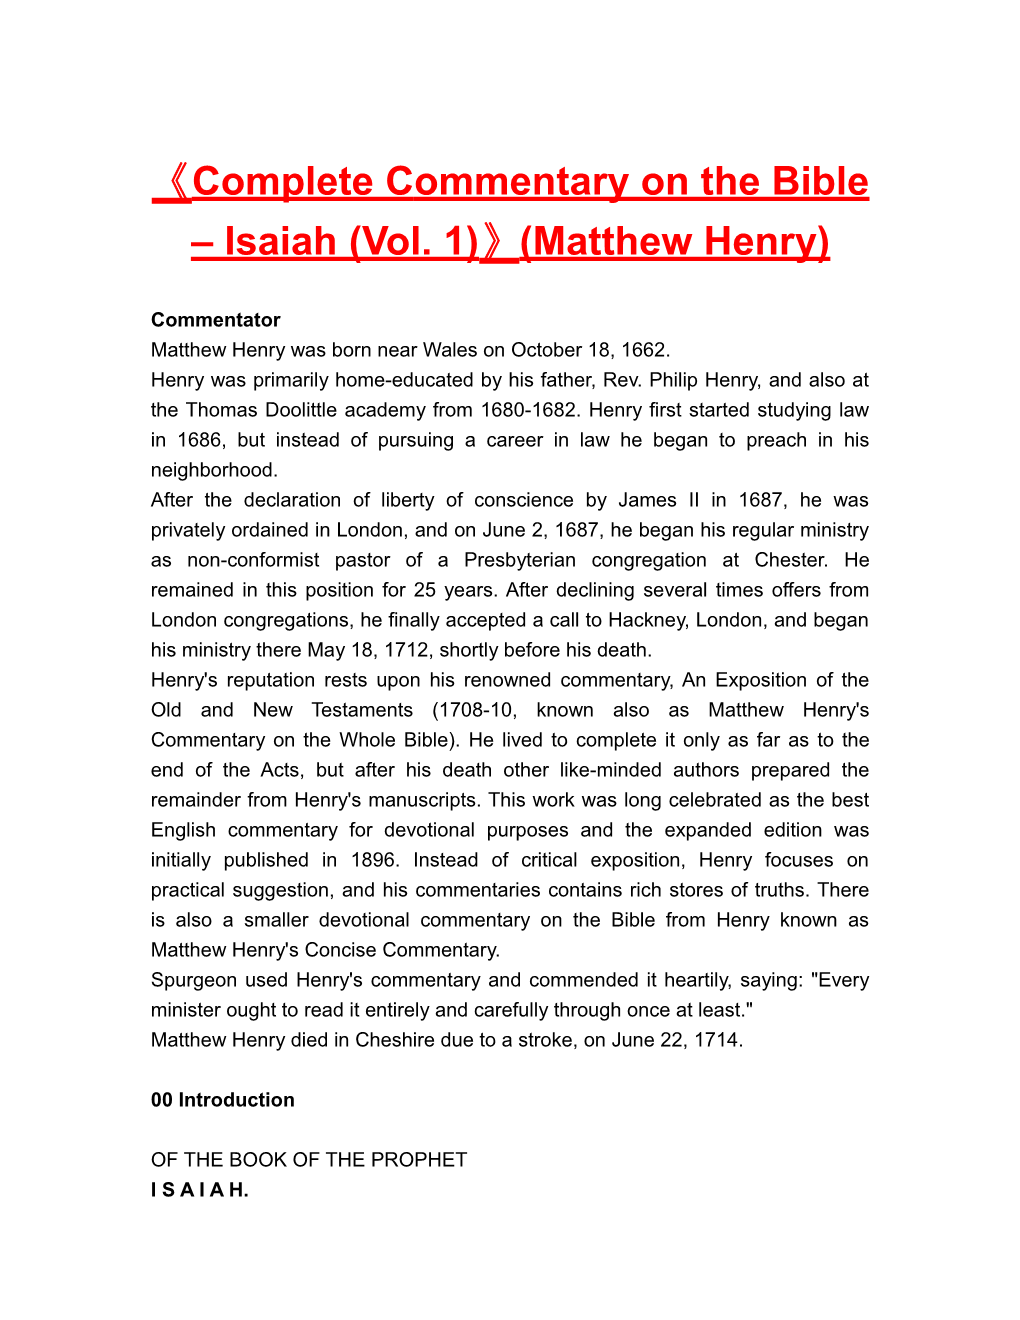 Completecommentary on the Bible Isaiah (Vol. 1) (Matthew Henry)